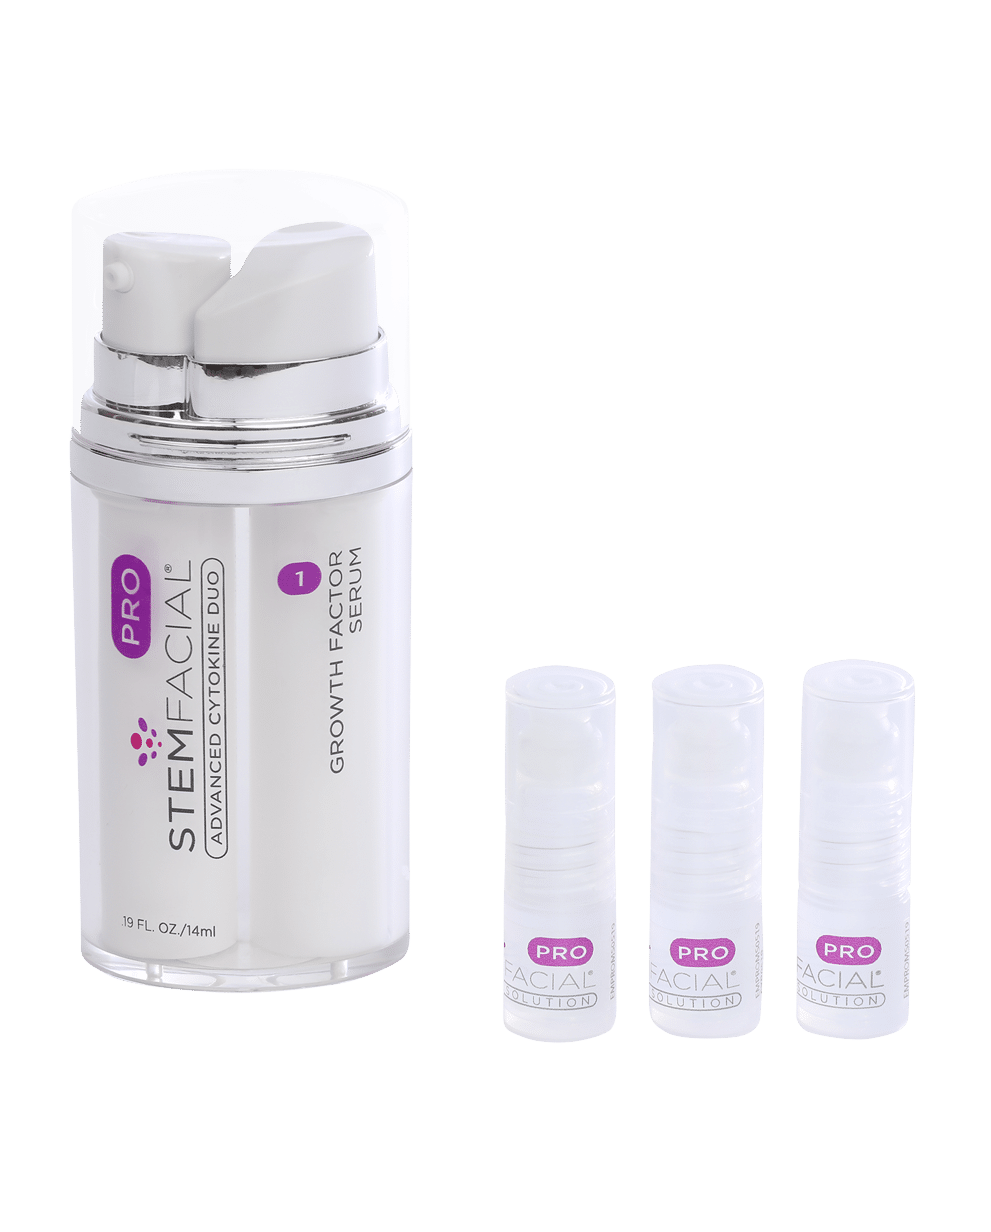 STEMFACIAL products